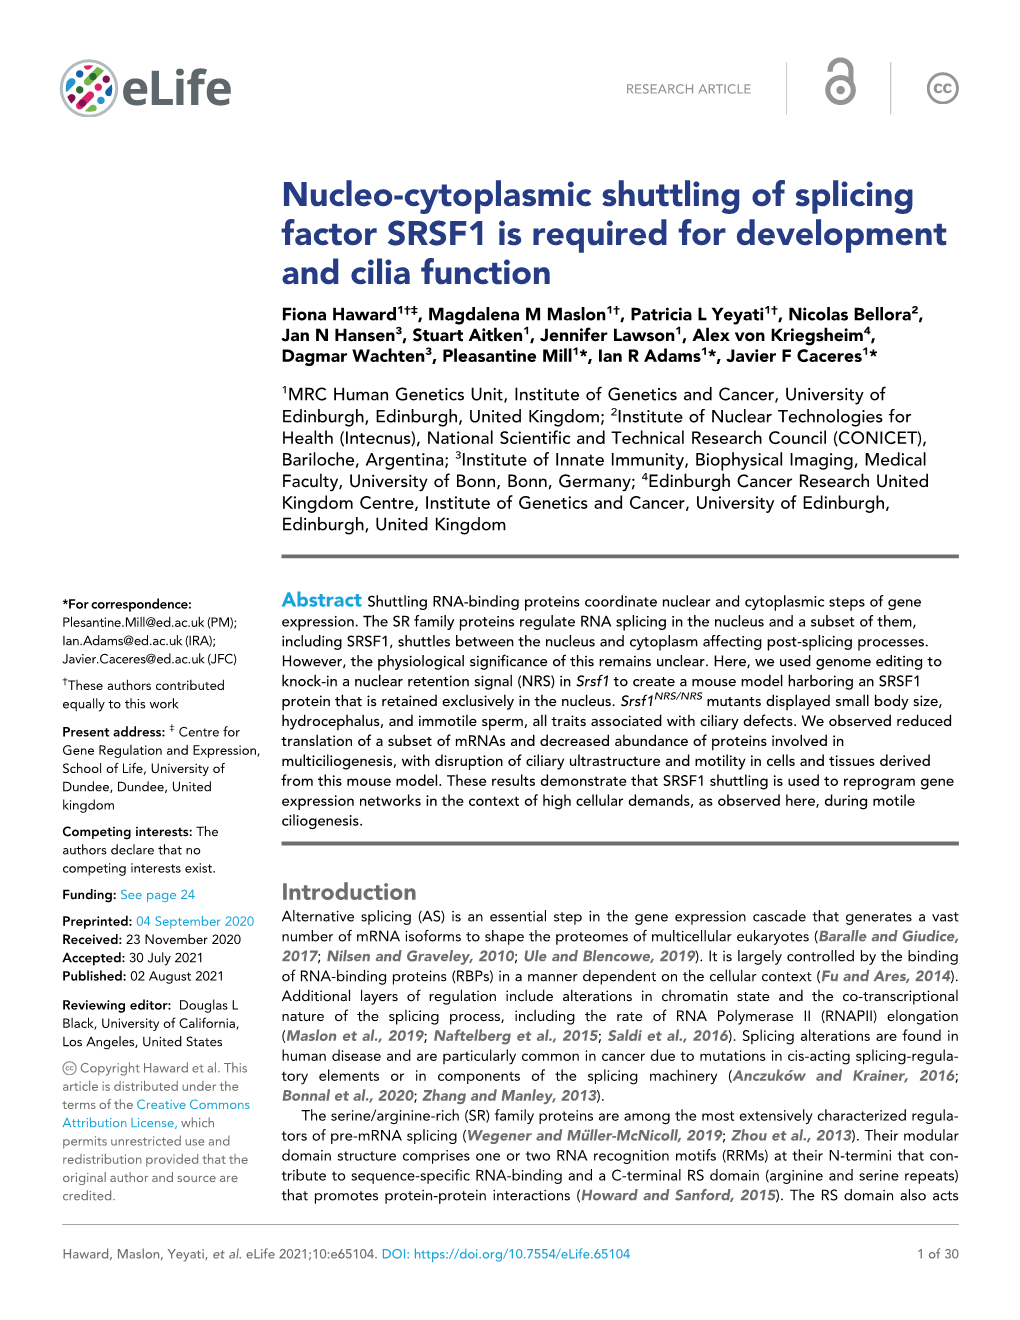 Nucleo-Cytoplasmic Shuttling of Splicing Factor SRSF1 Is Required For